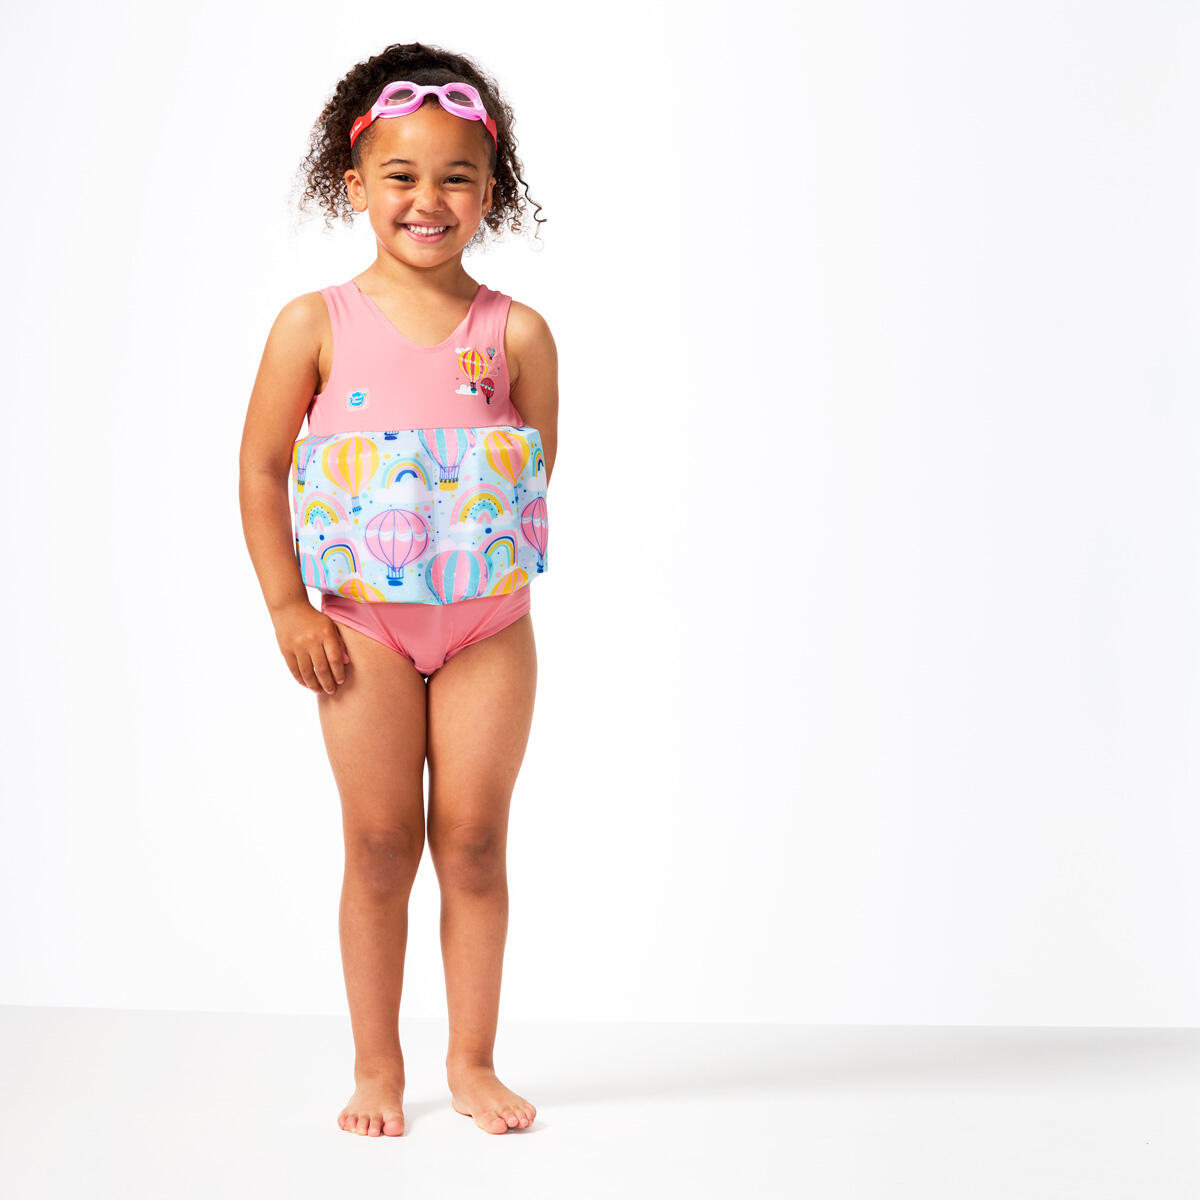 Splash About Kids Floatsuit with Adjustable Buoyancy, Over the Rainbow 6/6